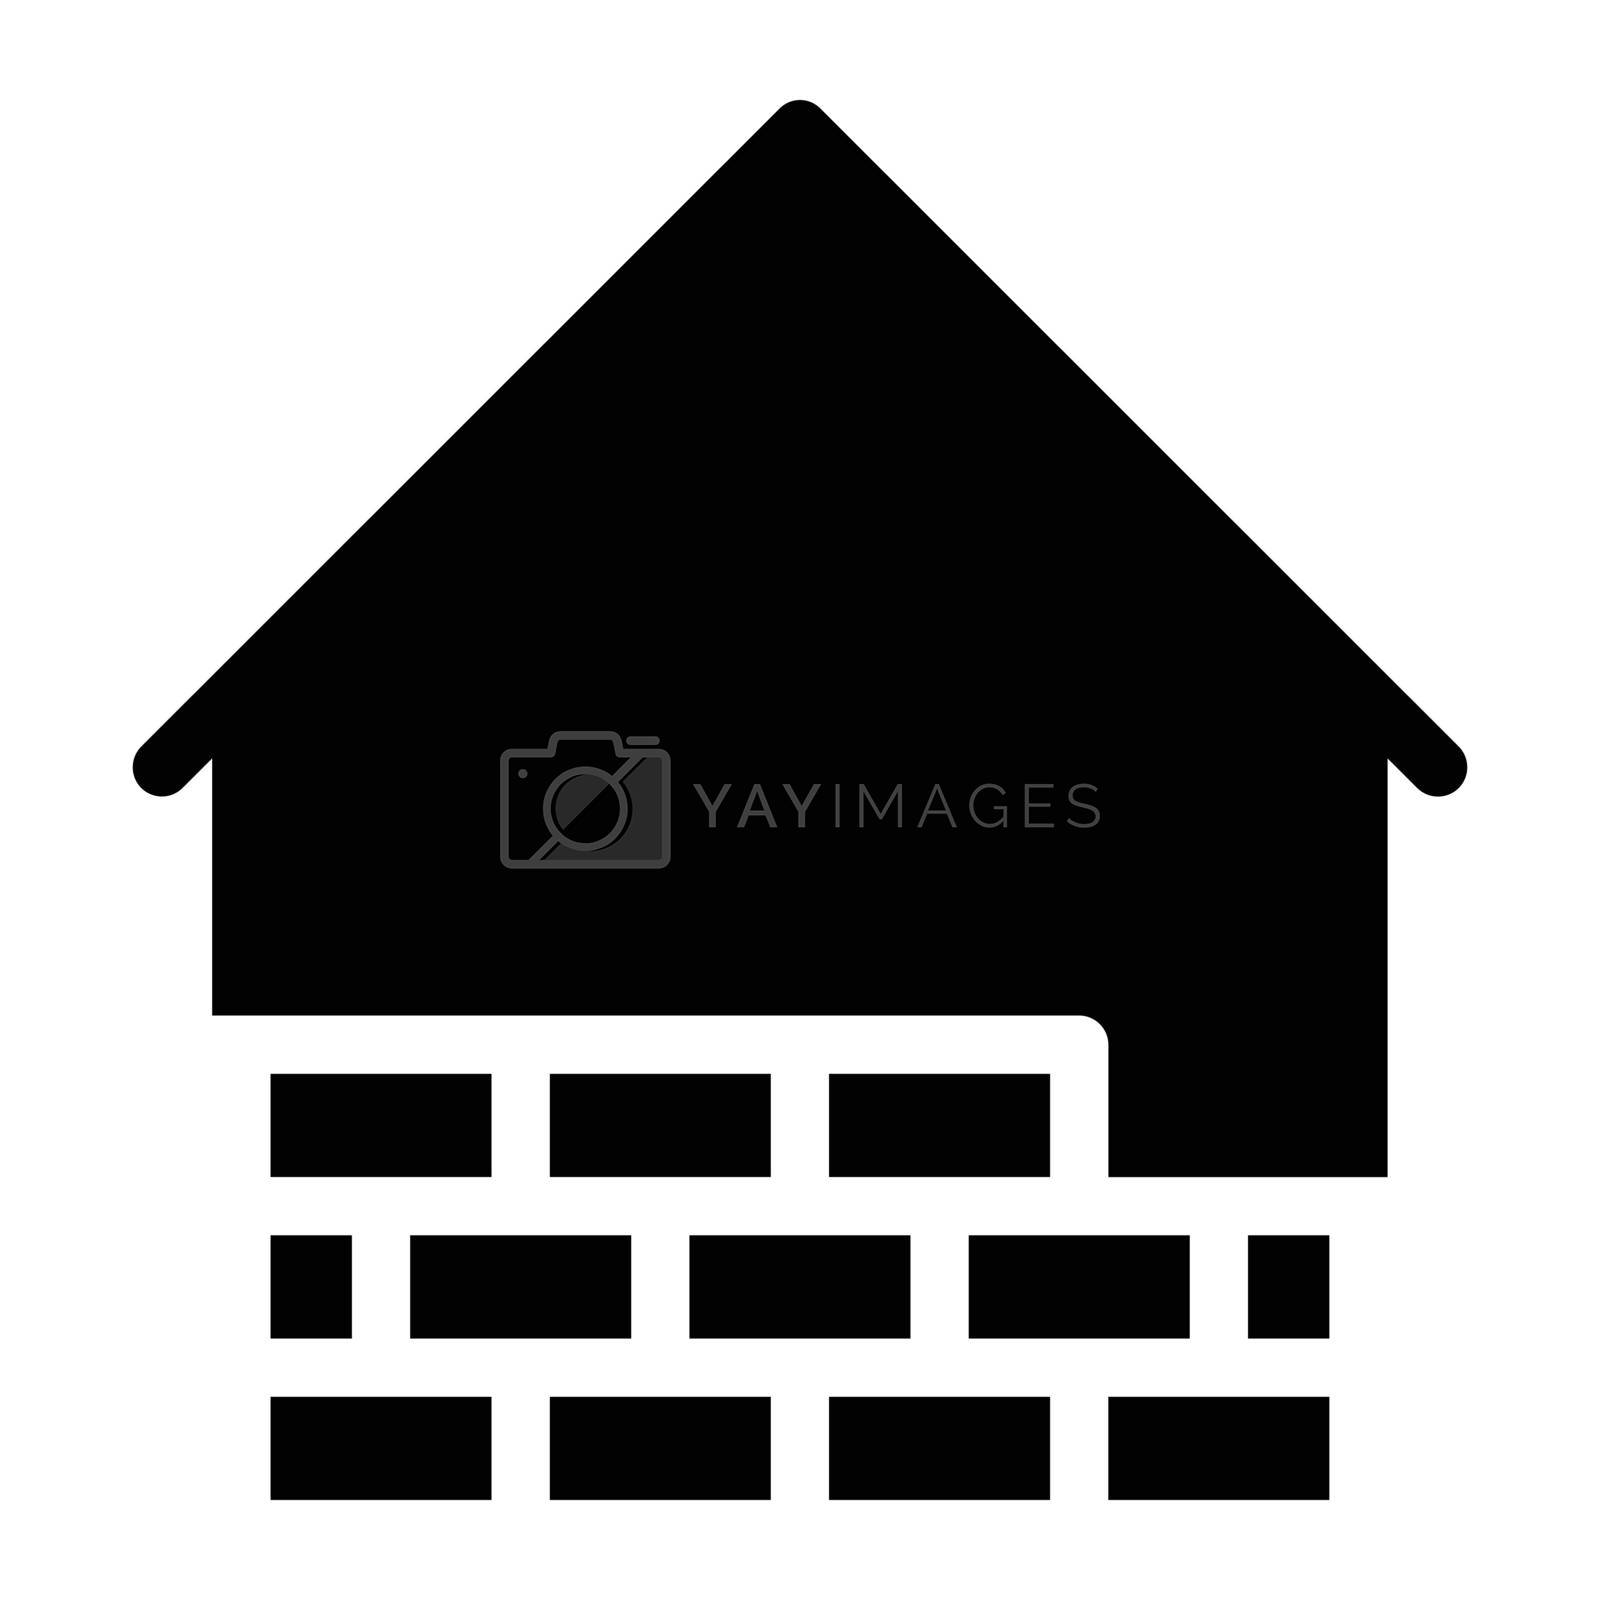 Royalty free image of wall by FlaticonsDesign